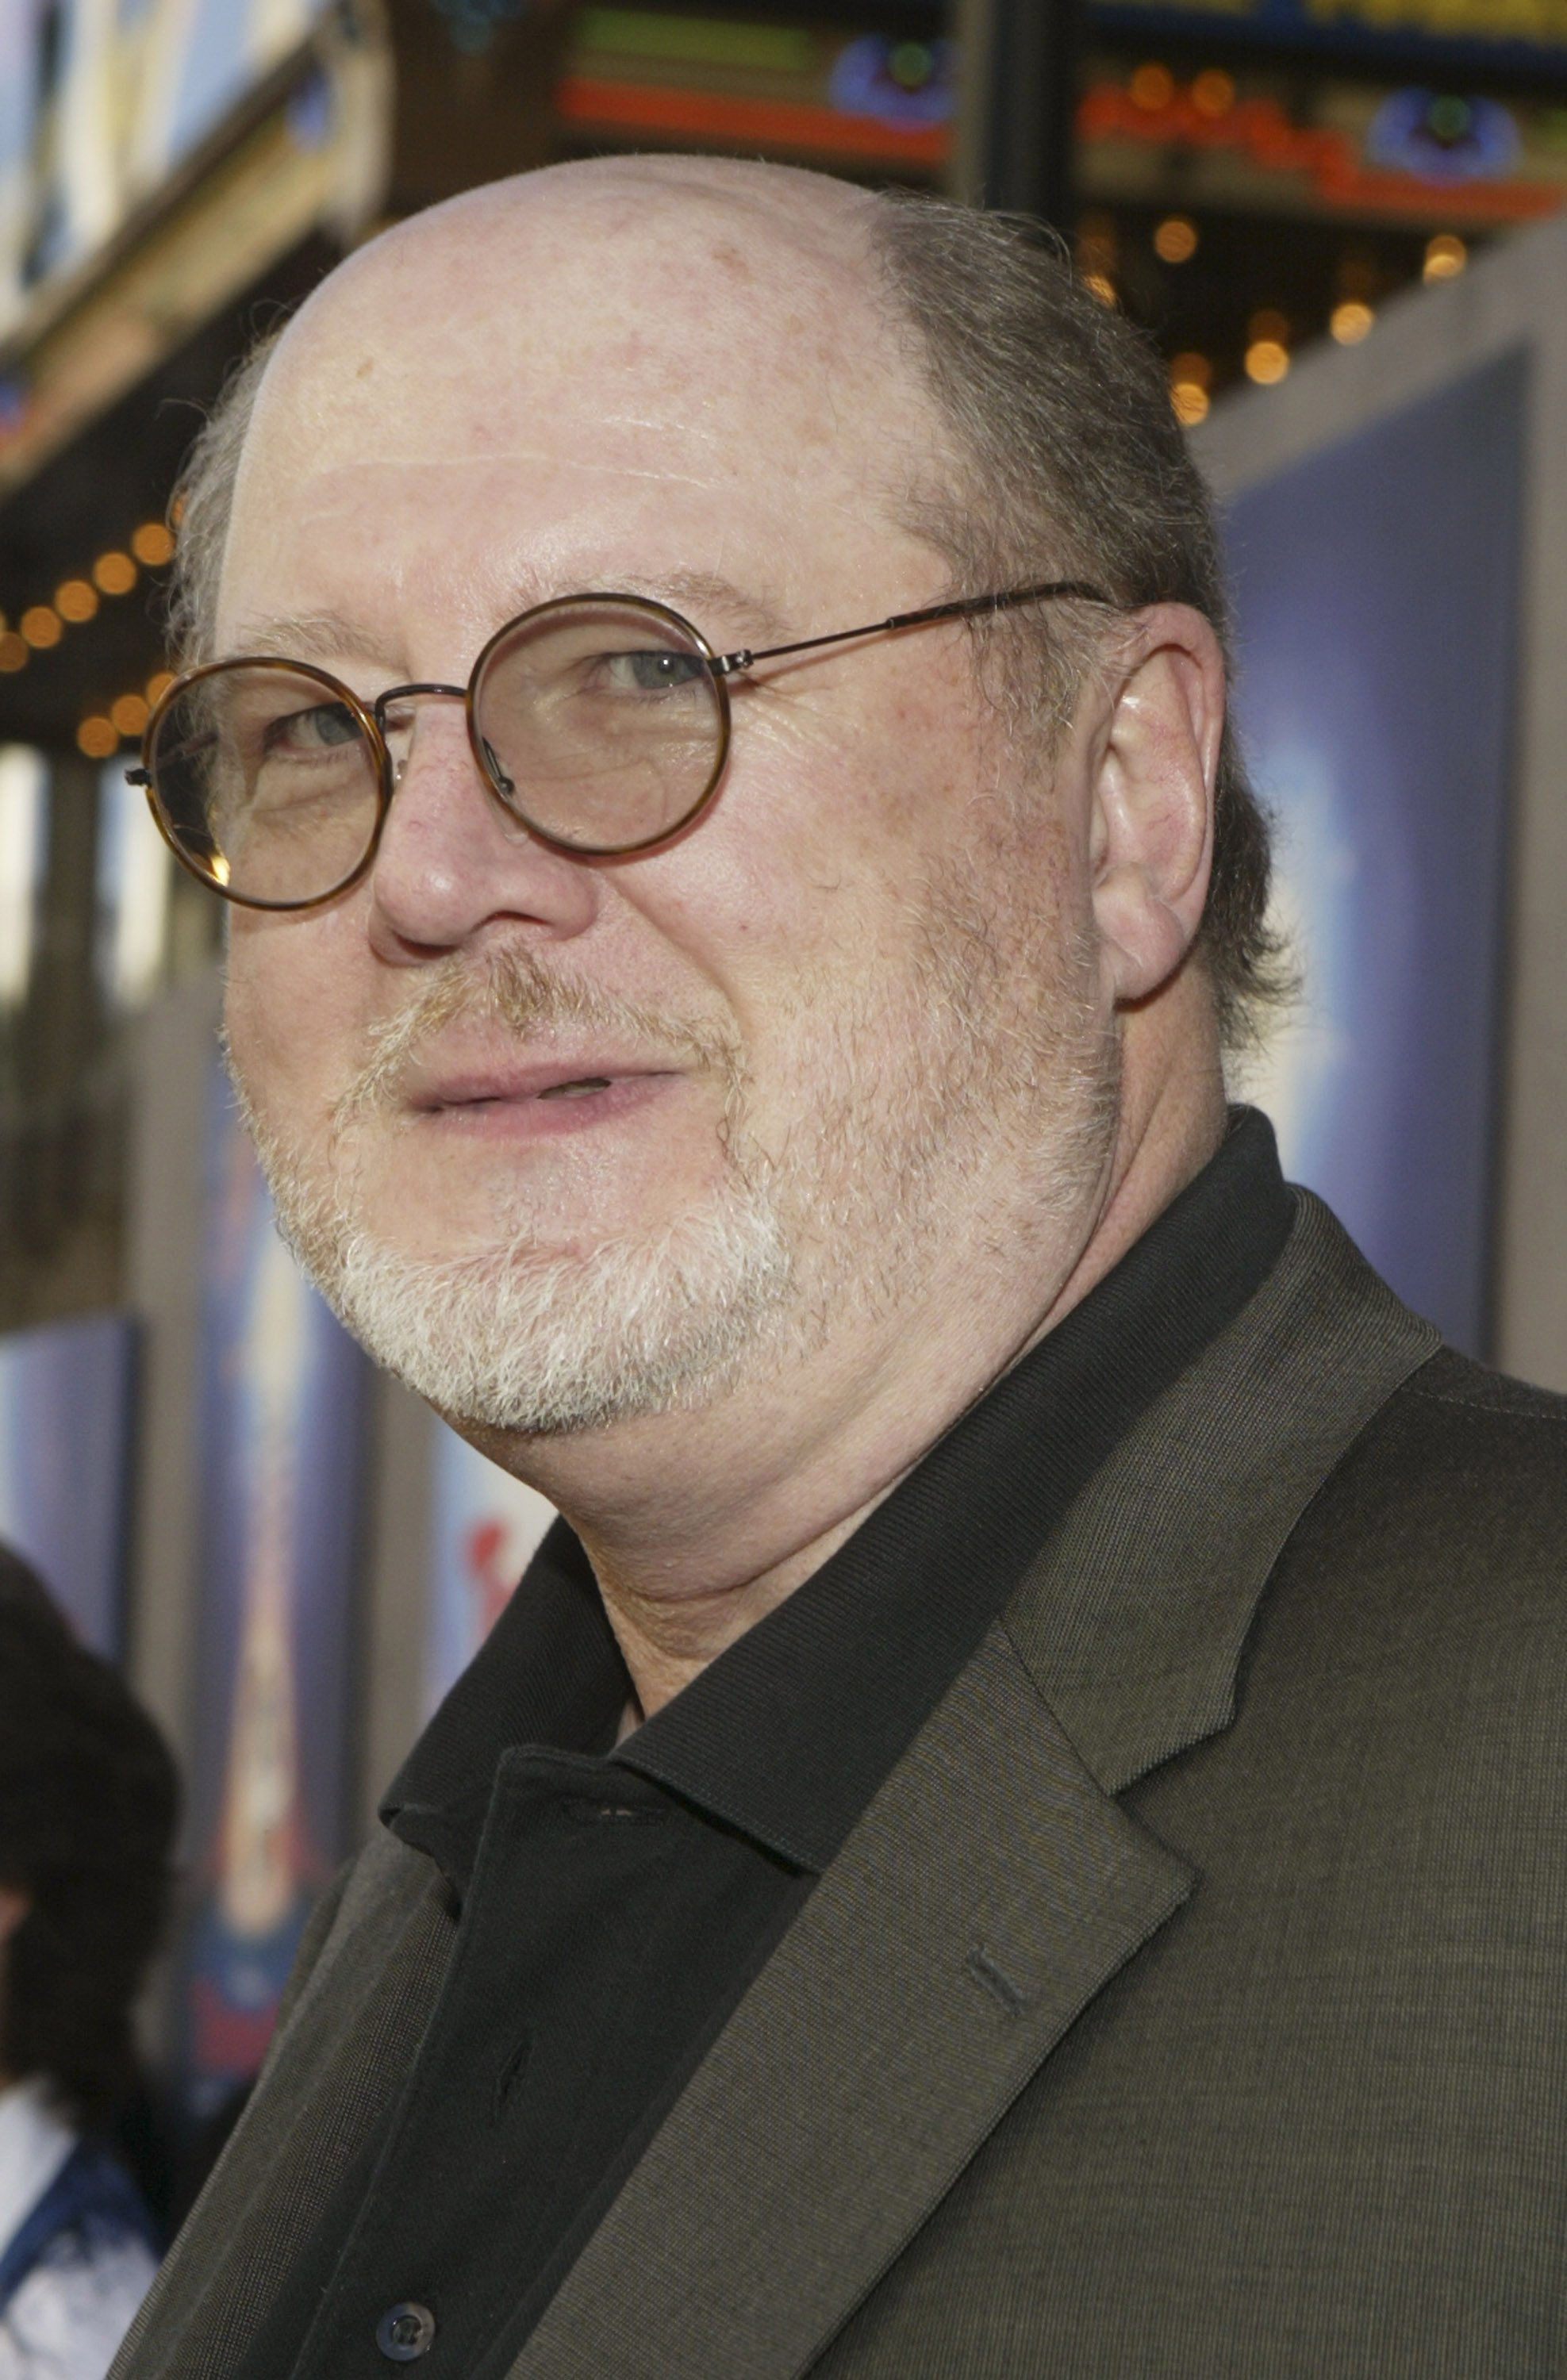   David Ogden Stiers at the World Premiere of "Teacher's Pet" in Hollywood. | Source: Getty Images